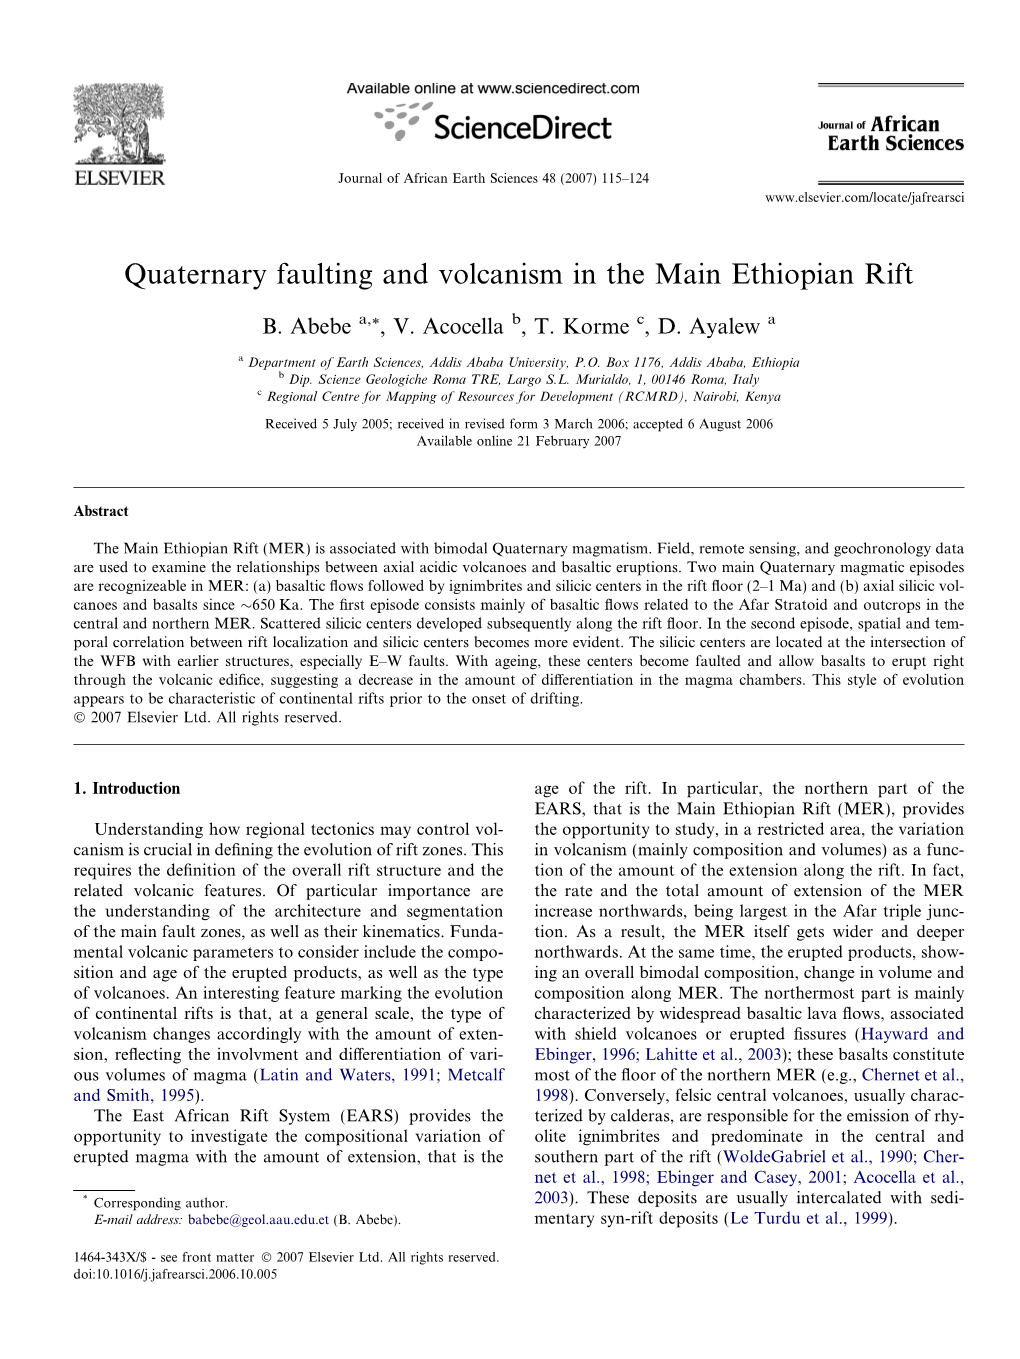 Quaternary Faulting and Volcanism in the Main Ethiopian Rift